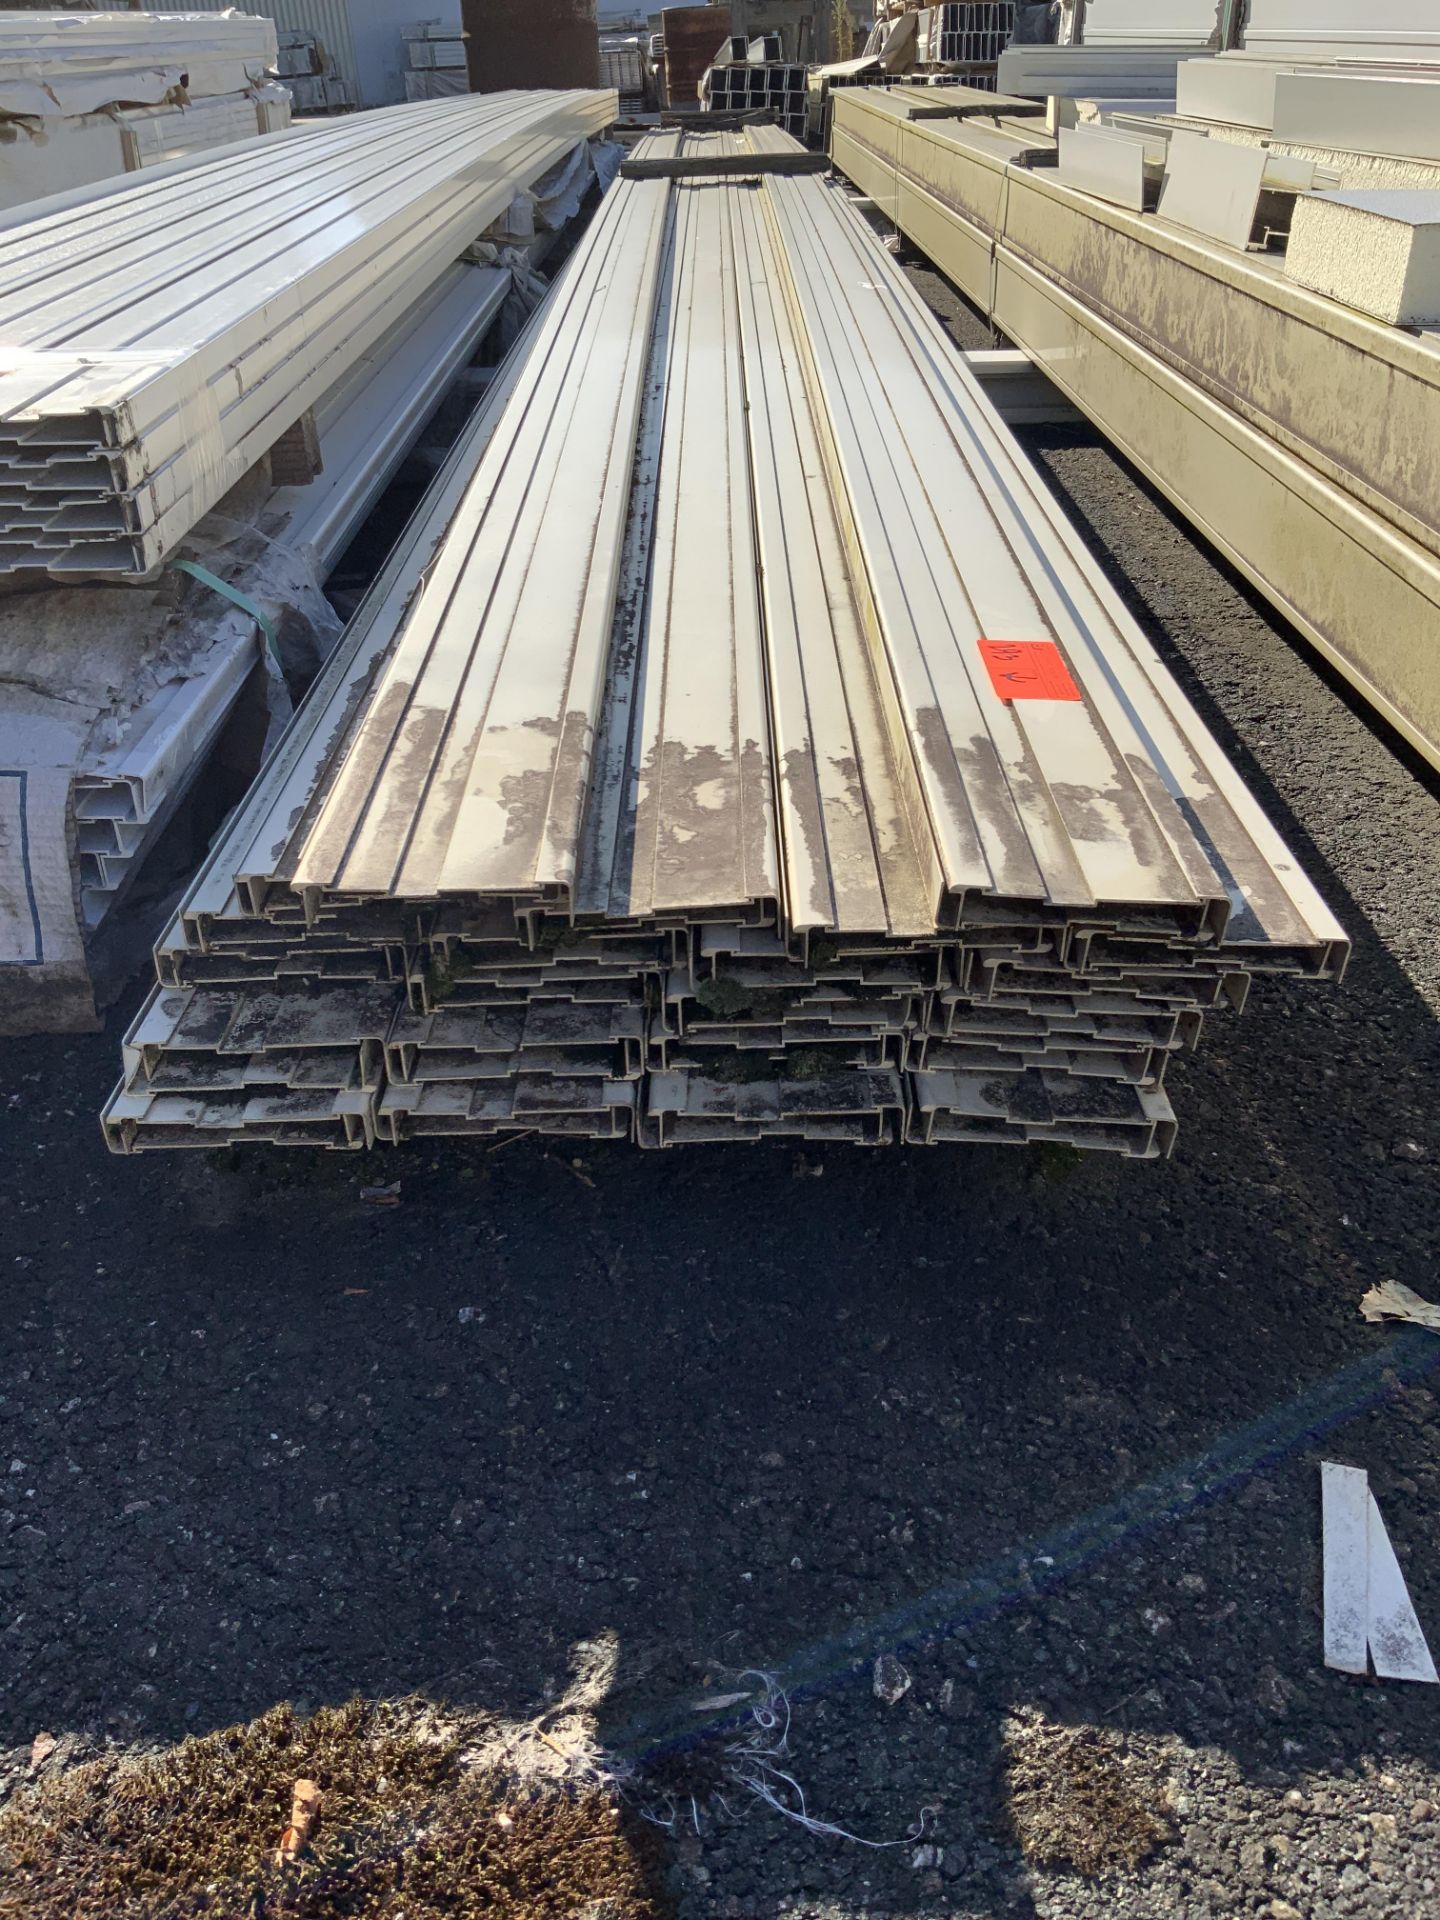 Extruded Aluminum Stock of Various Sizes - Image 3 of 5